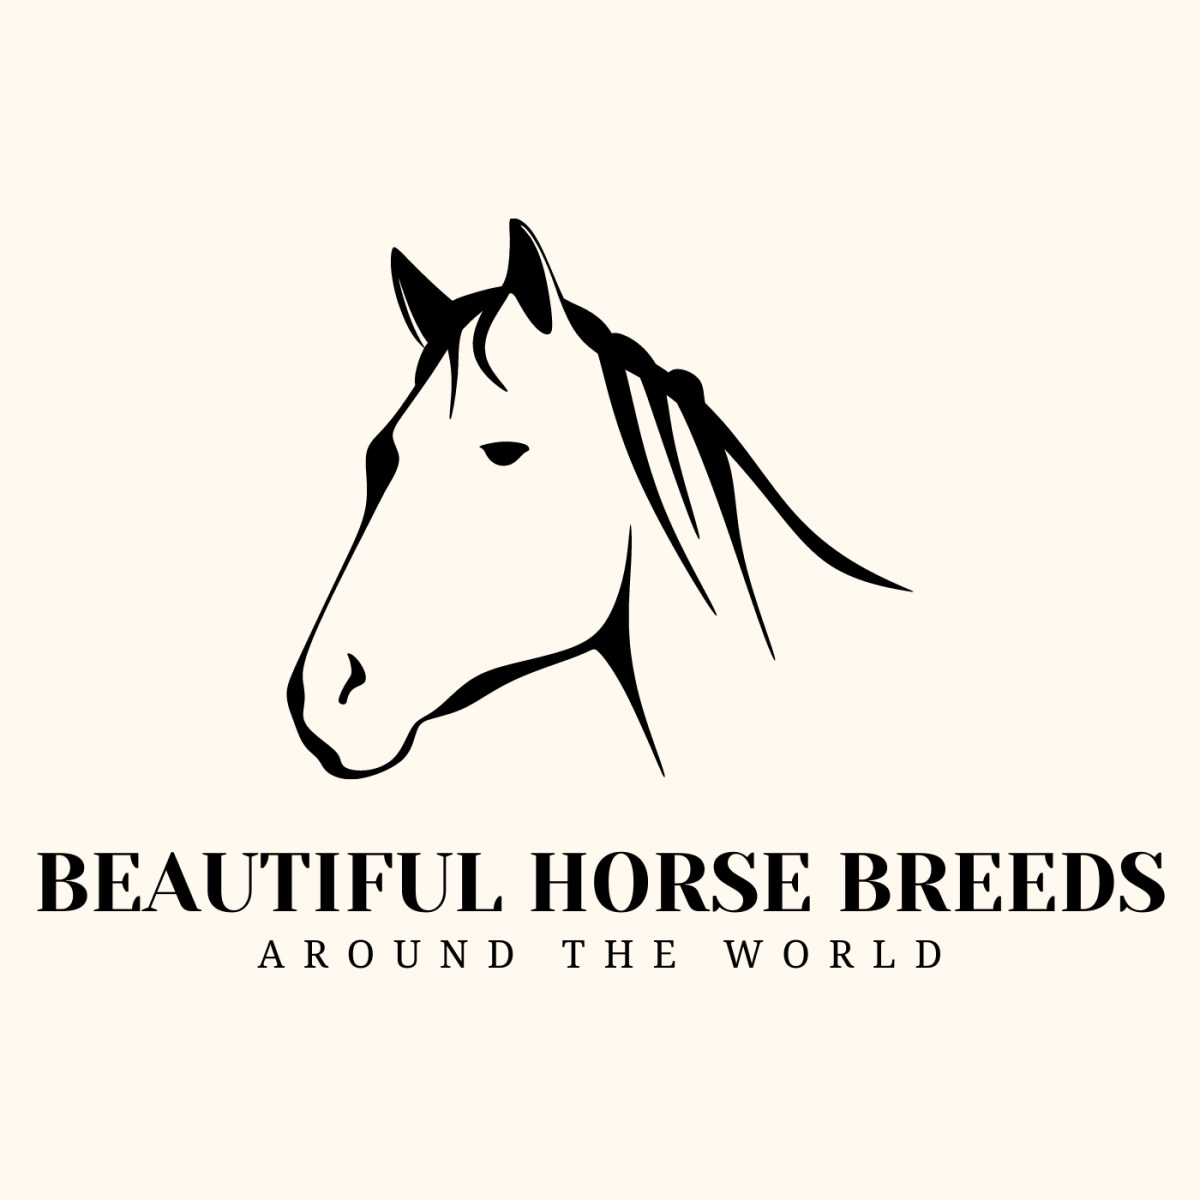 The Most Beautiful Horse Breeds Around the World